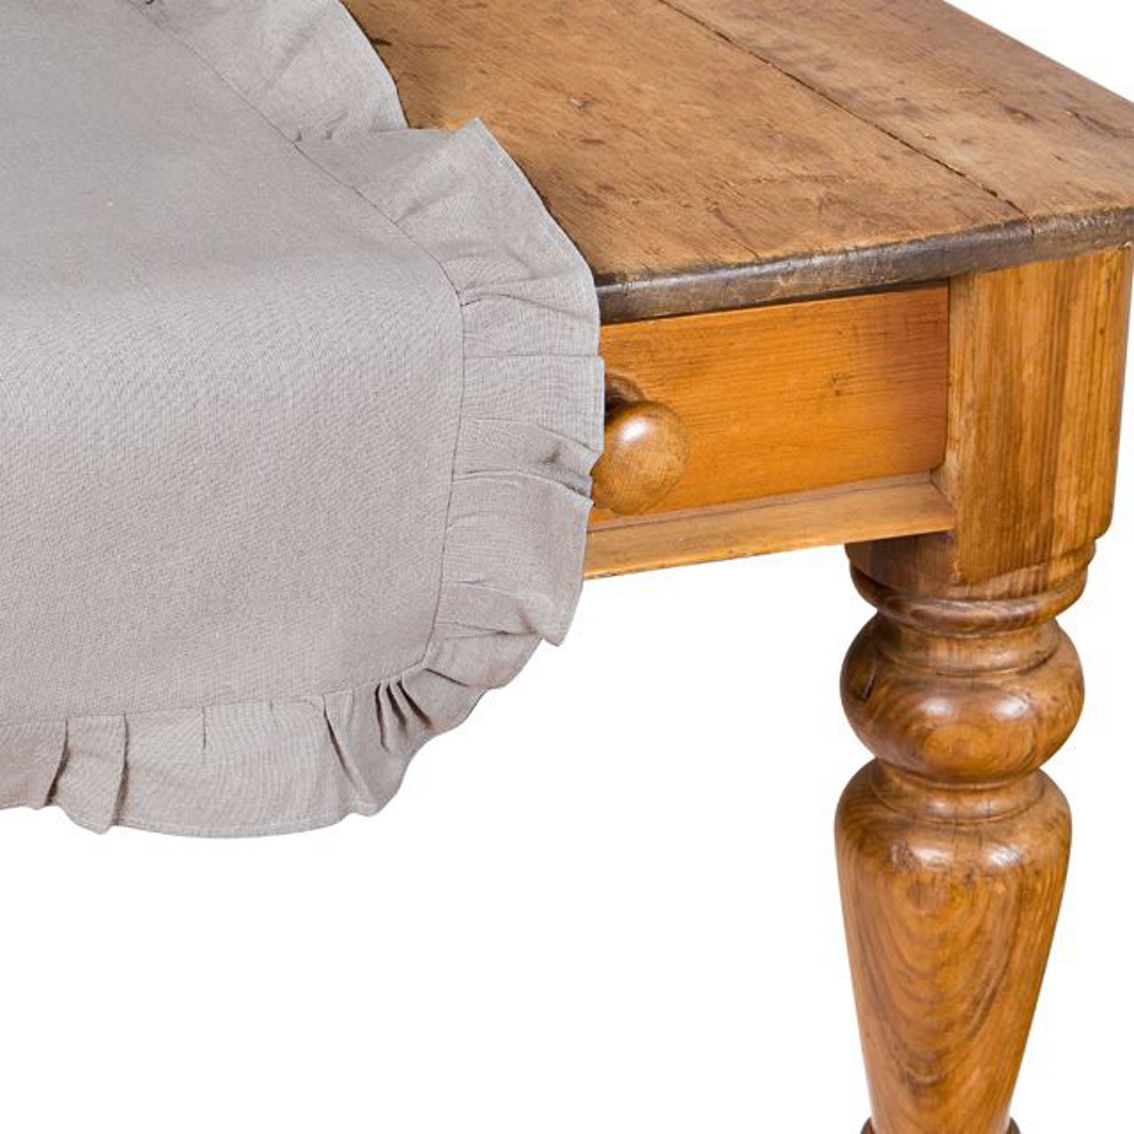 Xia Home Fashions, Ruffle Trim Solid Taupe Table Runner, 16 by 36-Inch - Image 2 of 2